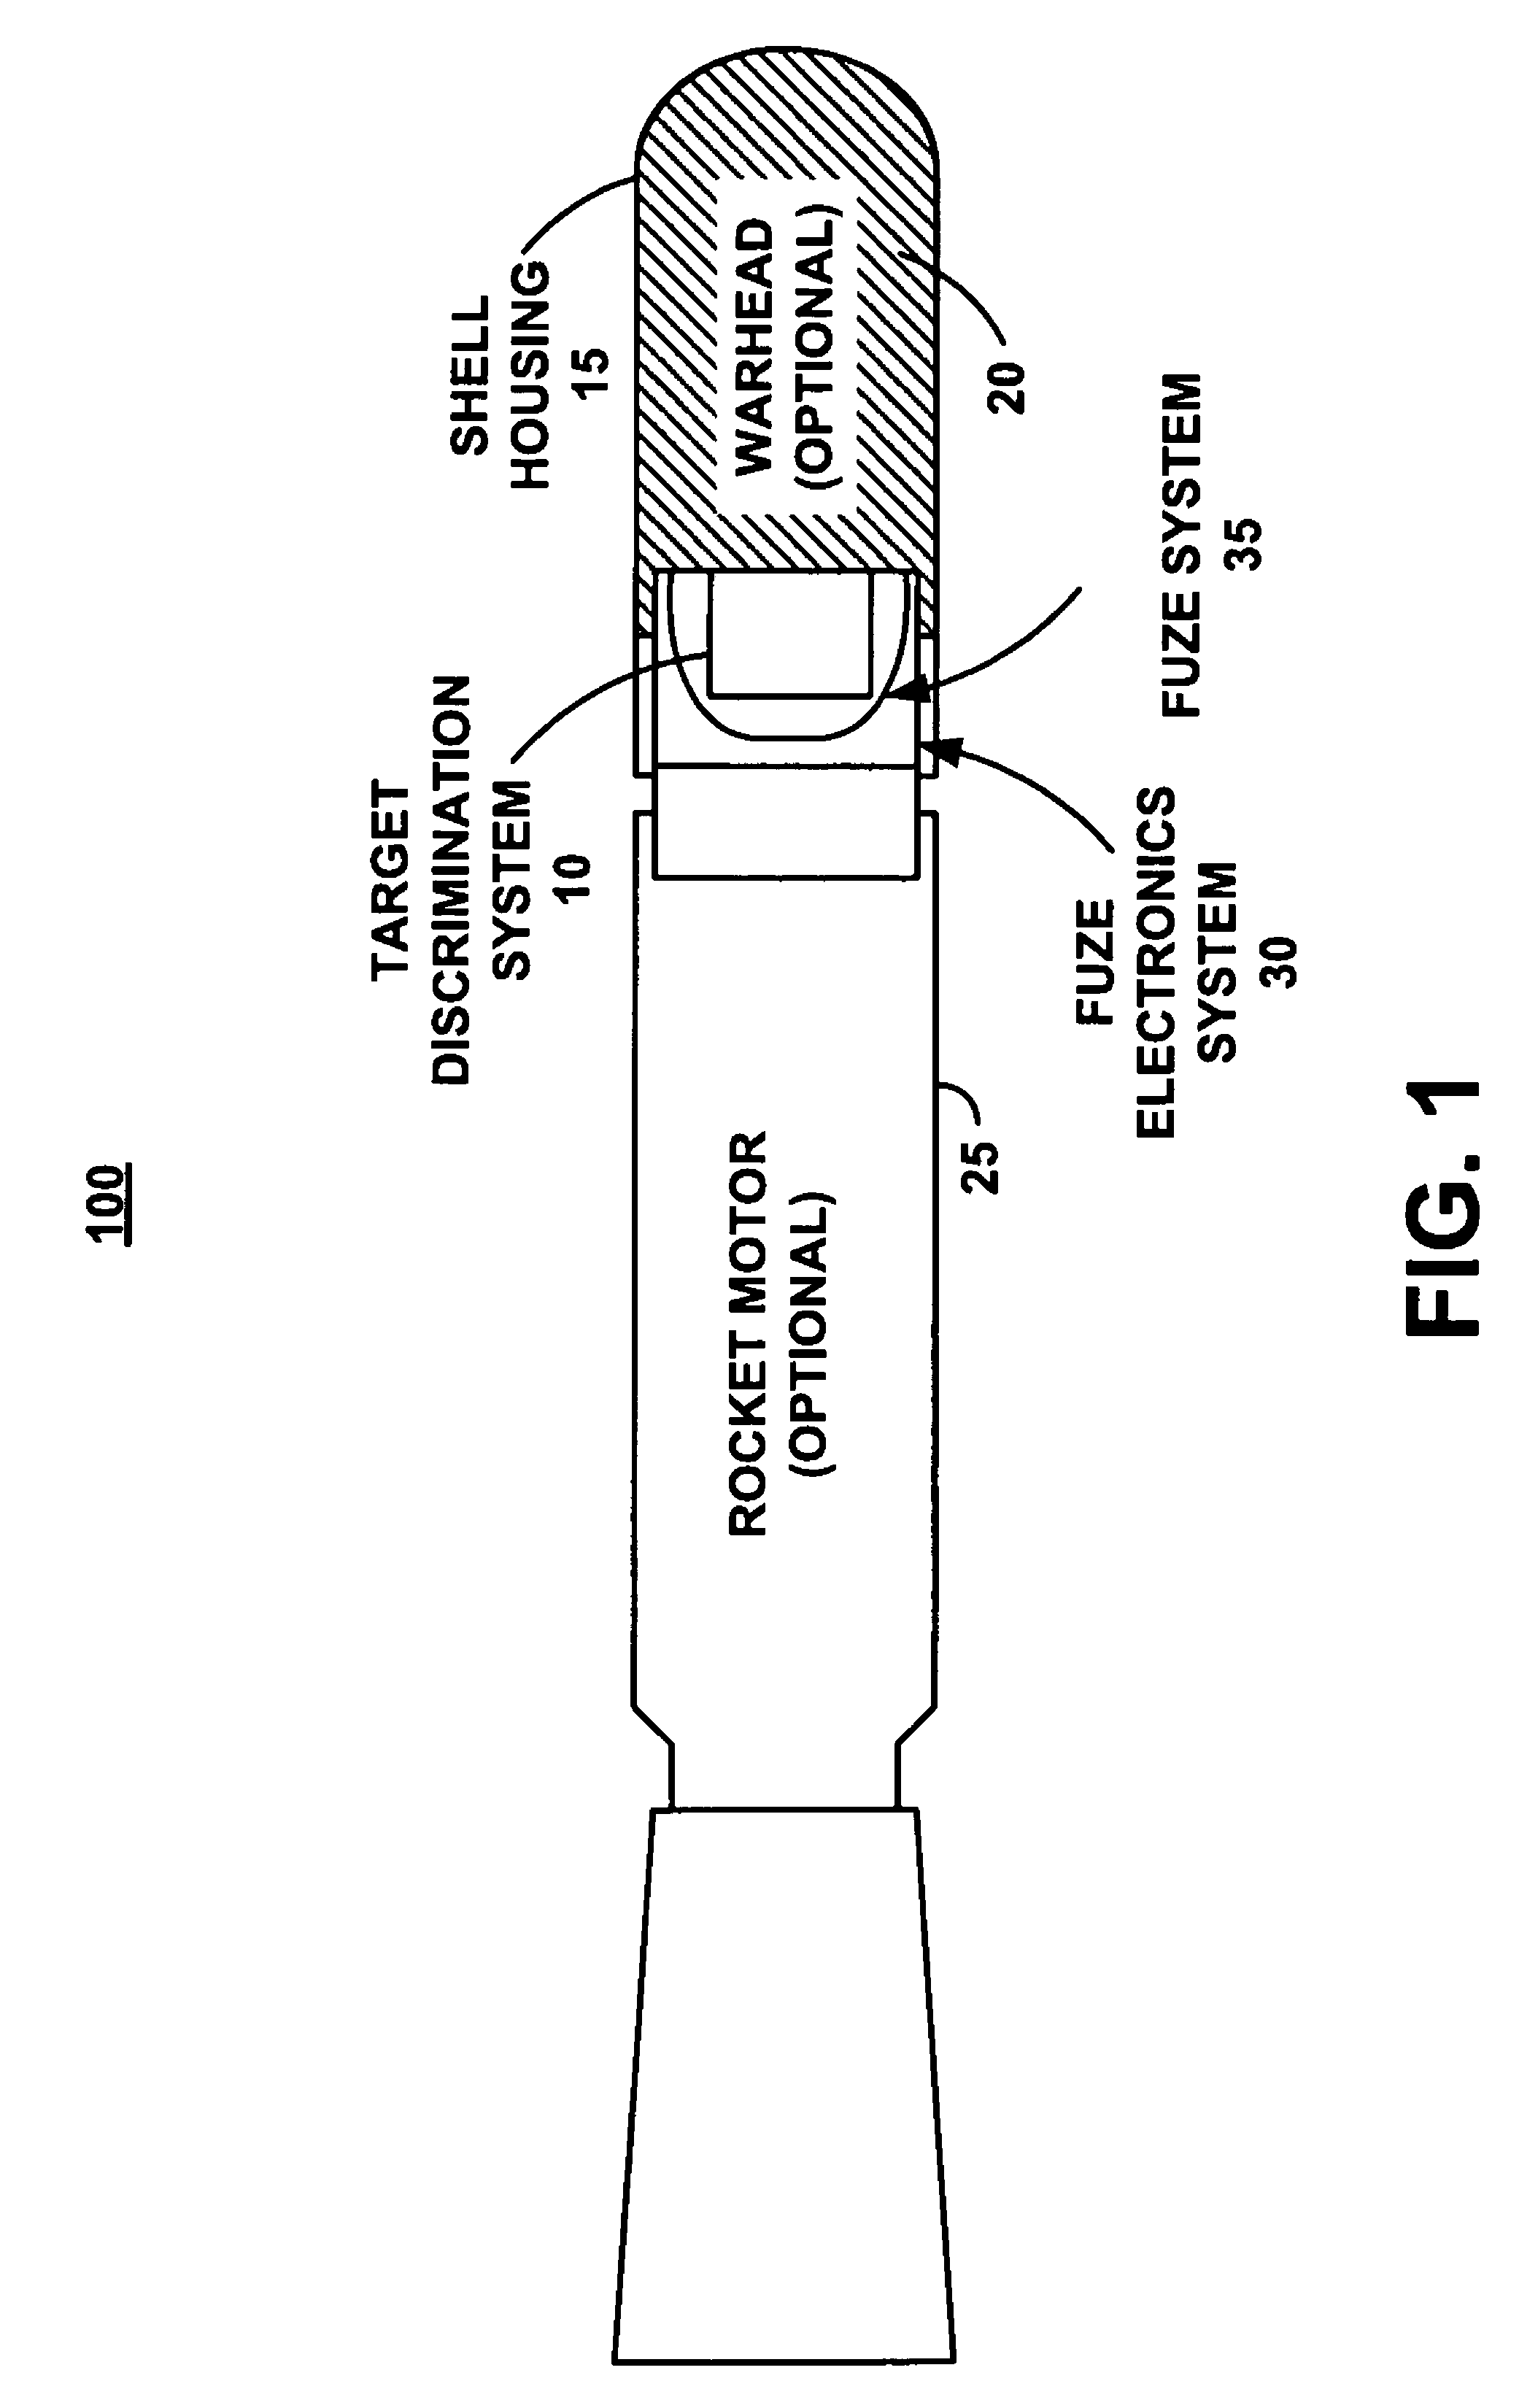 System and method for electronically discriminating a target